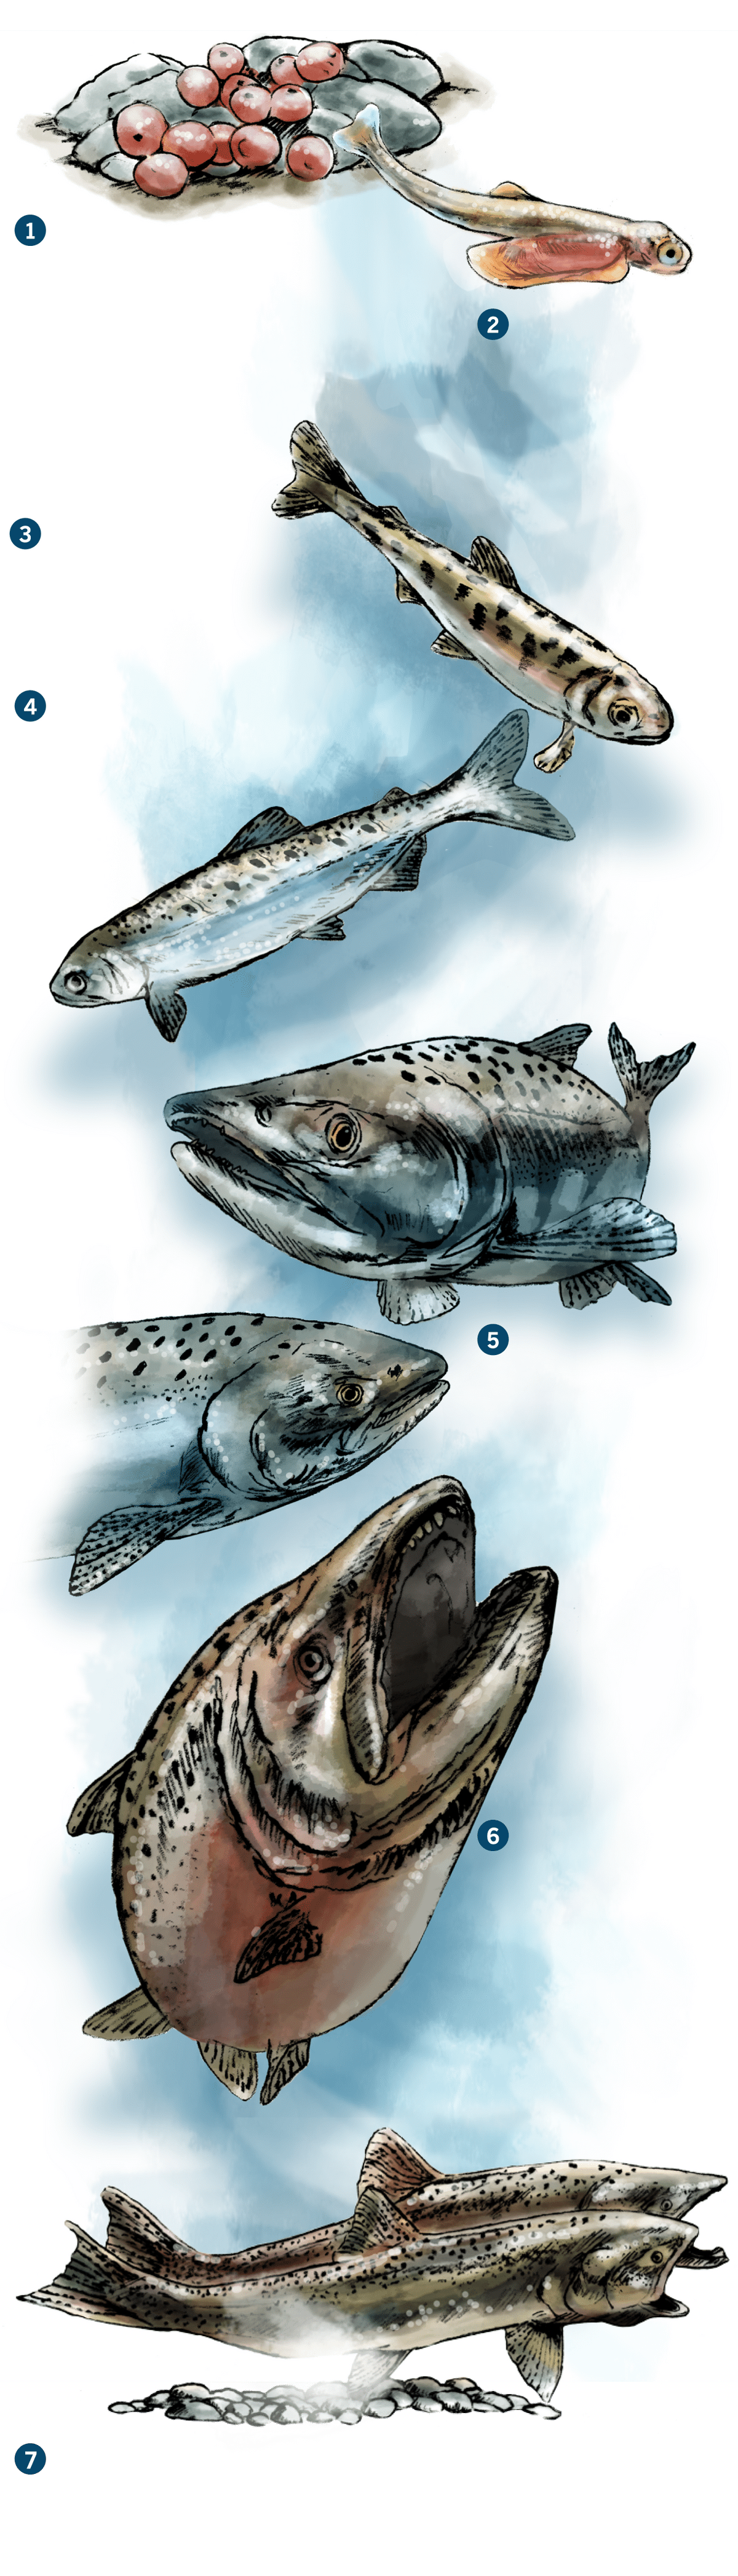 An illustration of salmon's life cycle